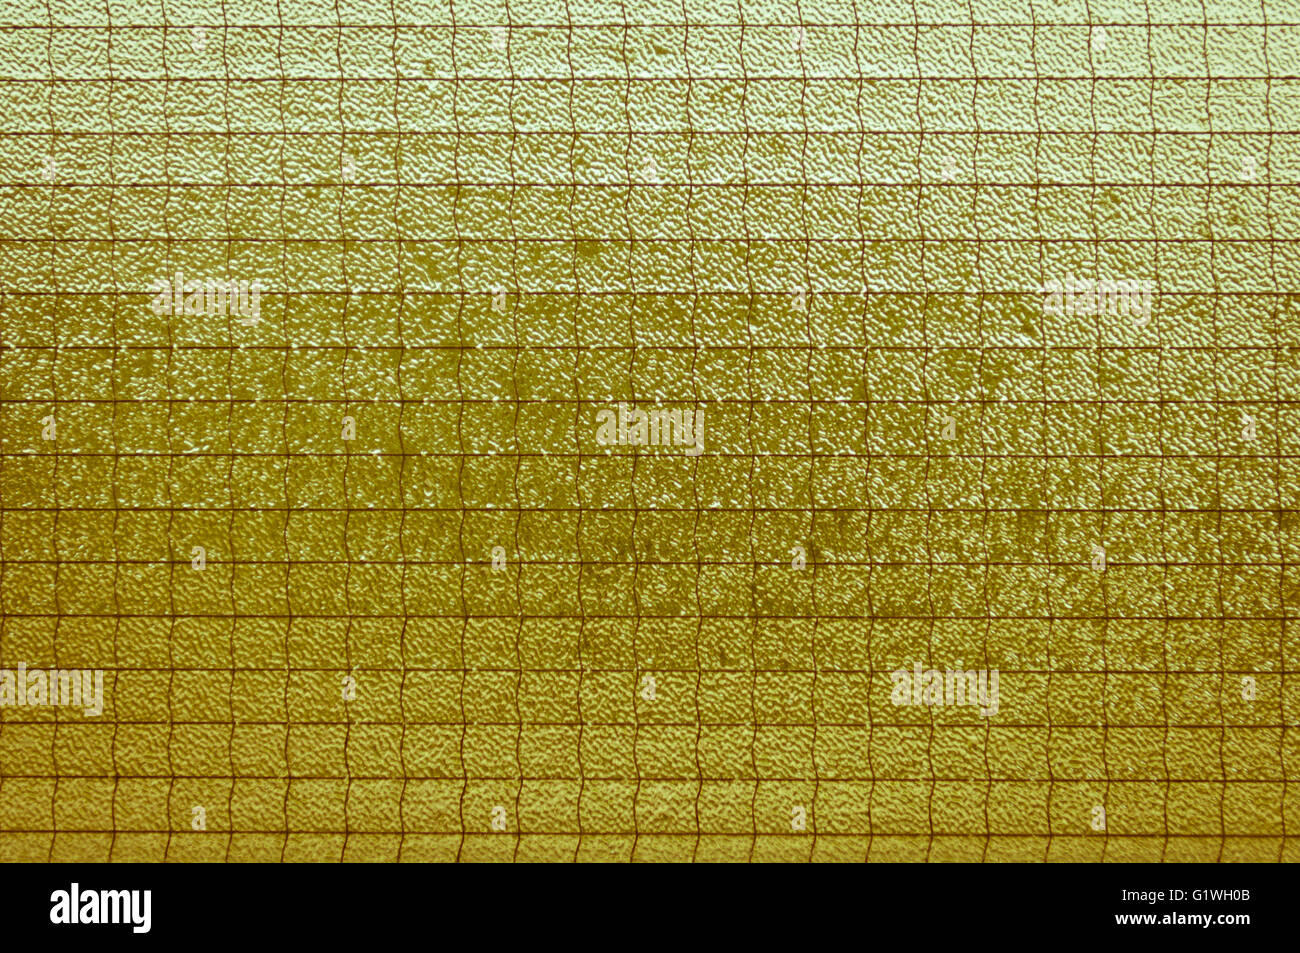 Old light yellowish-brown glass vintage background, textured Stock Photo